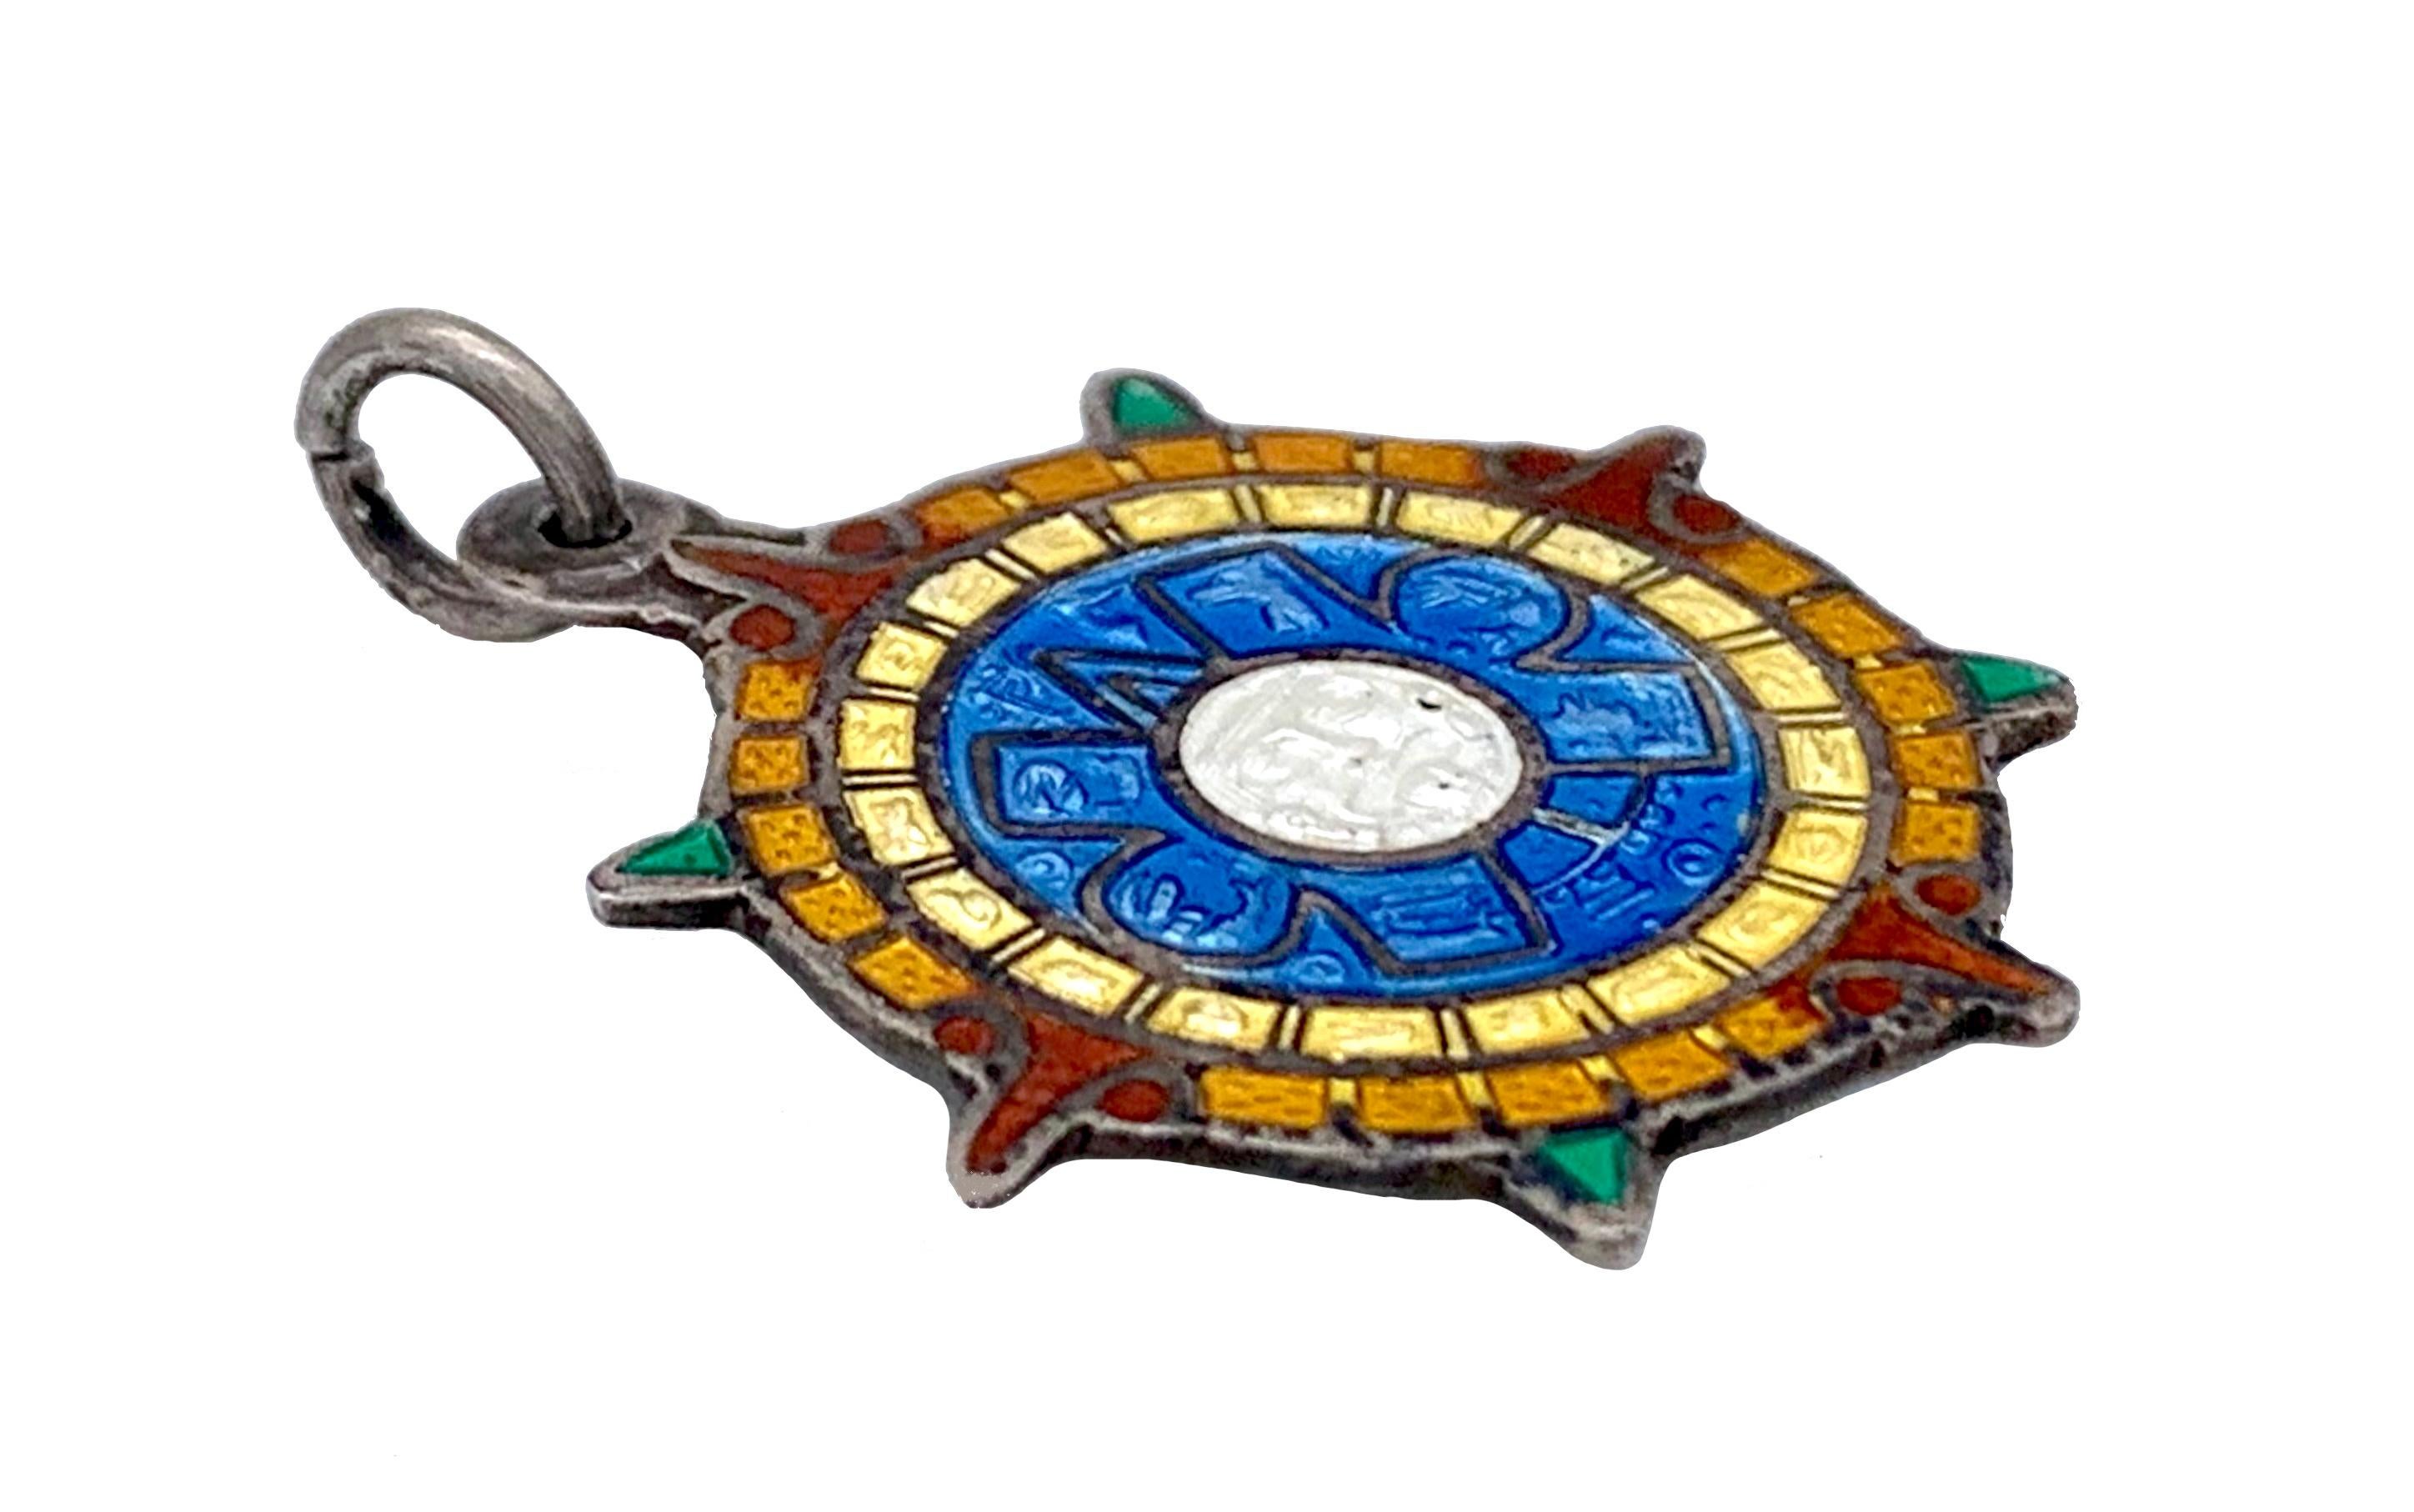 Vintage Taxco Aztec Motif Polychrome Guilloché Enamel Sterling Silver Pendant In Good Condition For Sale In Munich, Bavaria